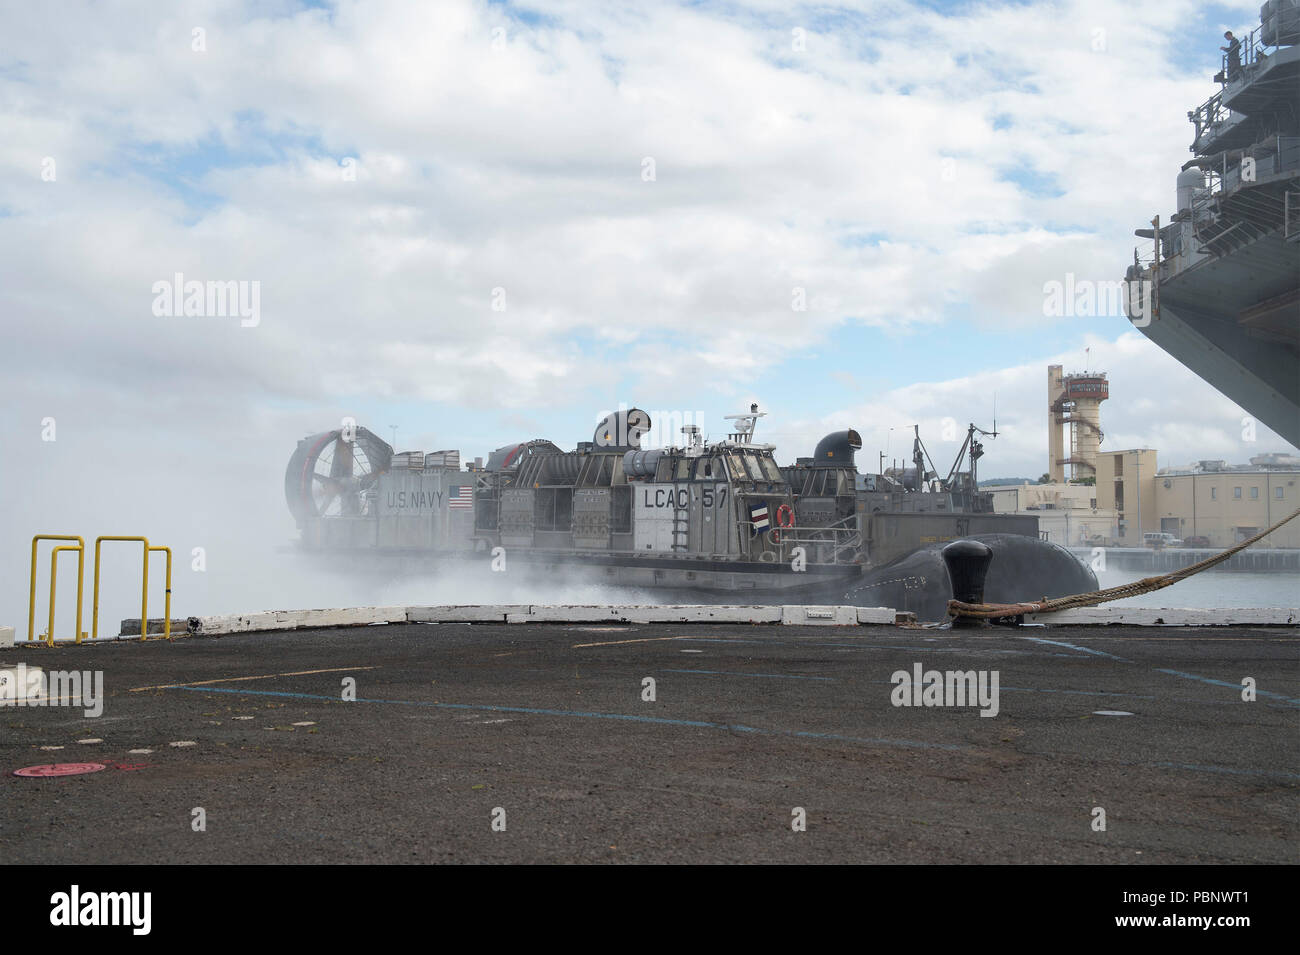 180726-N-XK809-1046 PEARL HARBOR, Hawaii (July 26, 2018) Landing craft air cushion (LCAC) 57, assigned to Assault Craft Unit (ACU) 5, departs the well deck of the amphibious assault ship USS Bonhomme Richard (LHD 6). Bonhomme Richard is currently underway in the U.S. 3rd Fleet area of operations. (U.S. Navy photo by Mass Communication Specialist 2nd Class William Sykes) Stock Photo